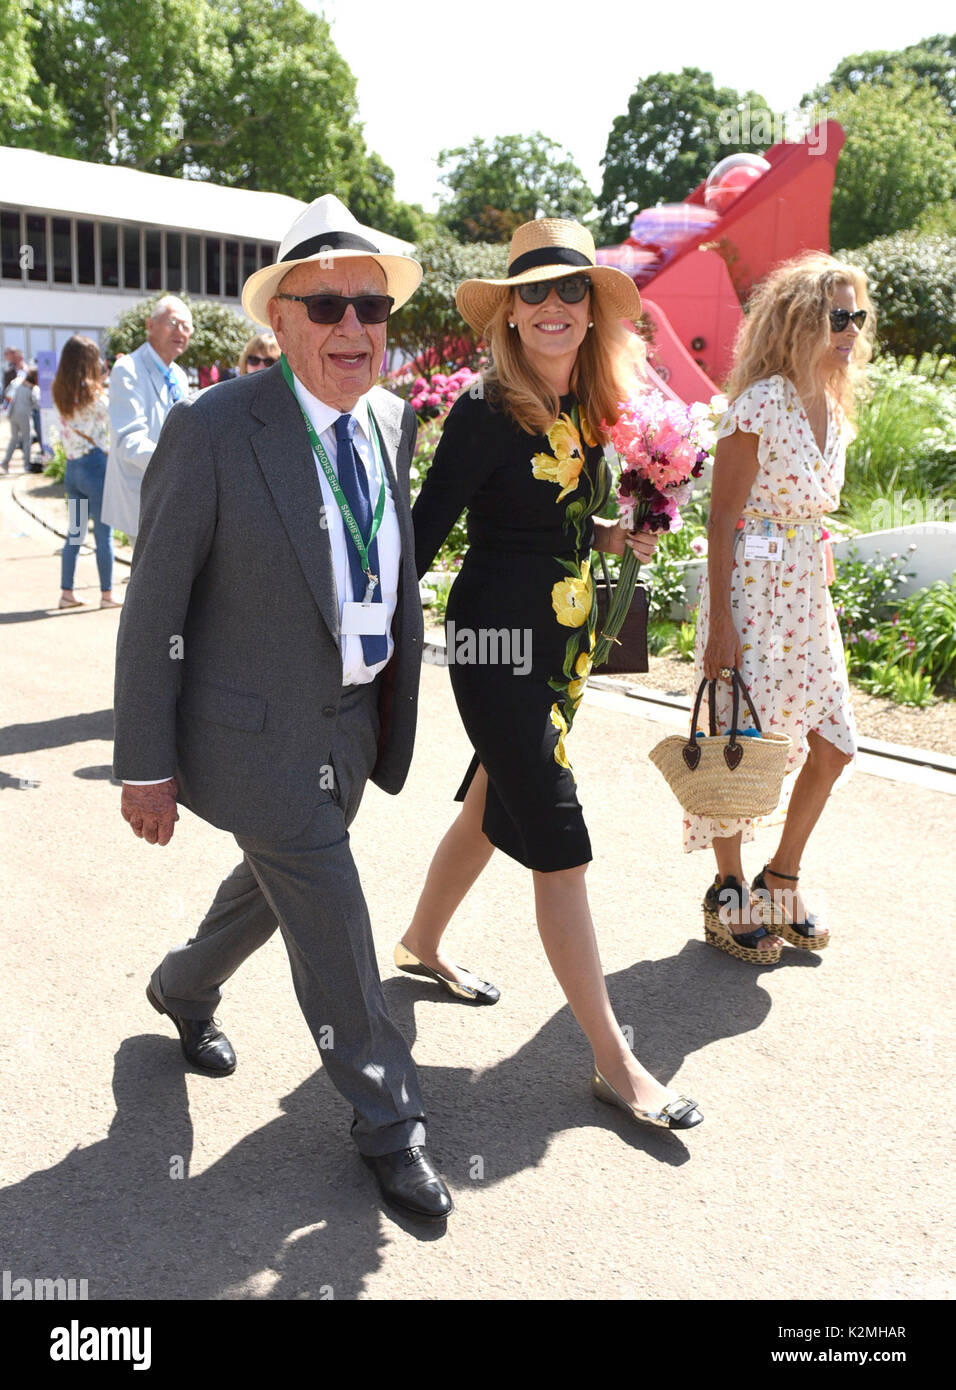 Photo Must Be Credited ©Alpha Press 079965 22/05/2017 Suzanne Accosta Rupert Murdoch and Jerry Hall RHS Chelsea Flower Show 2017 Royal Hospital Chelsea London Stock Photo